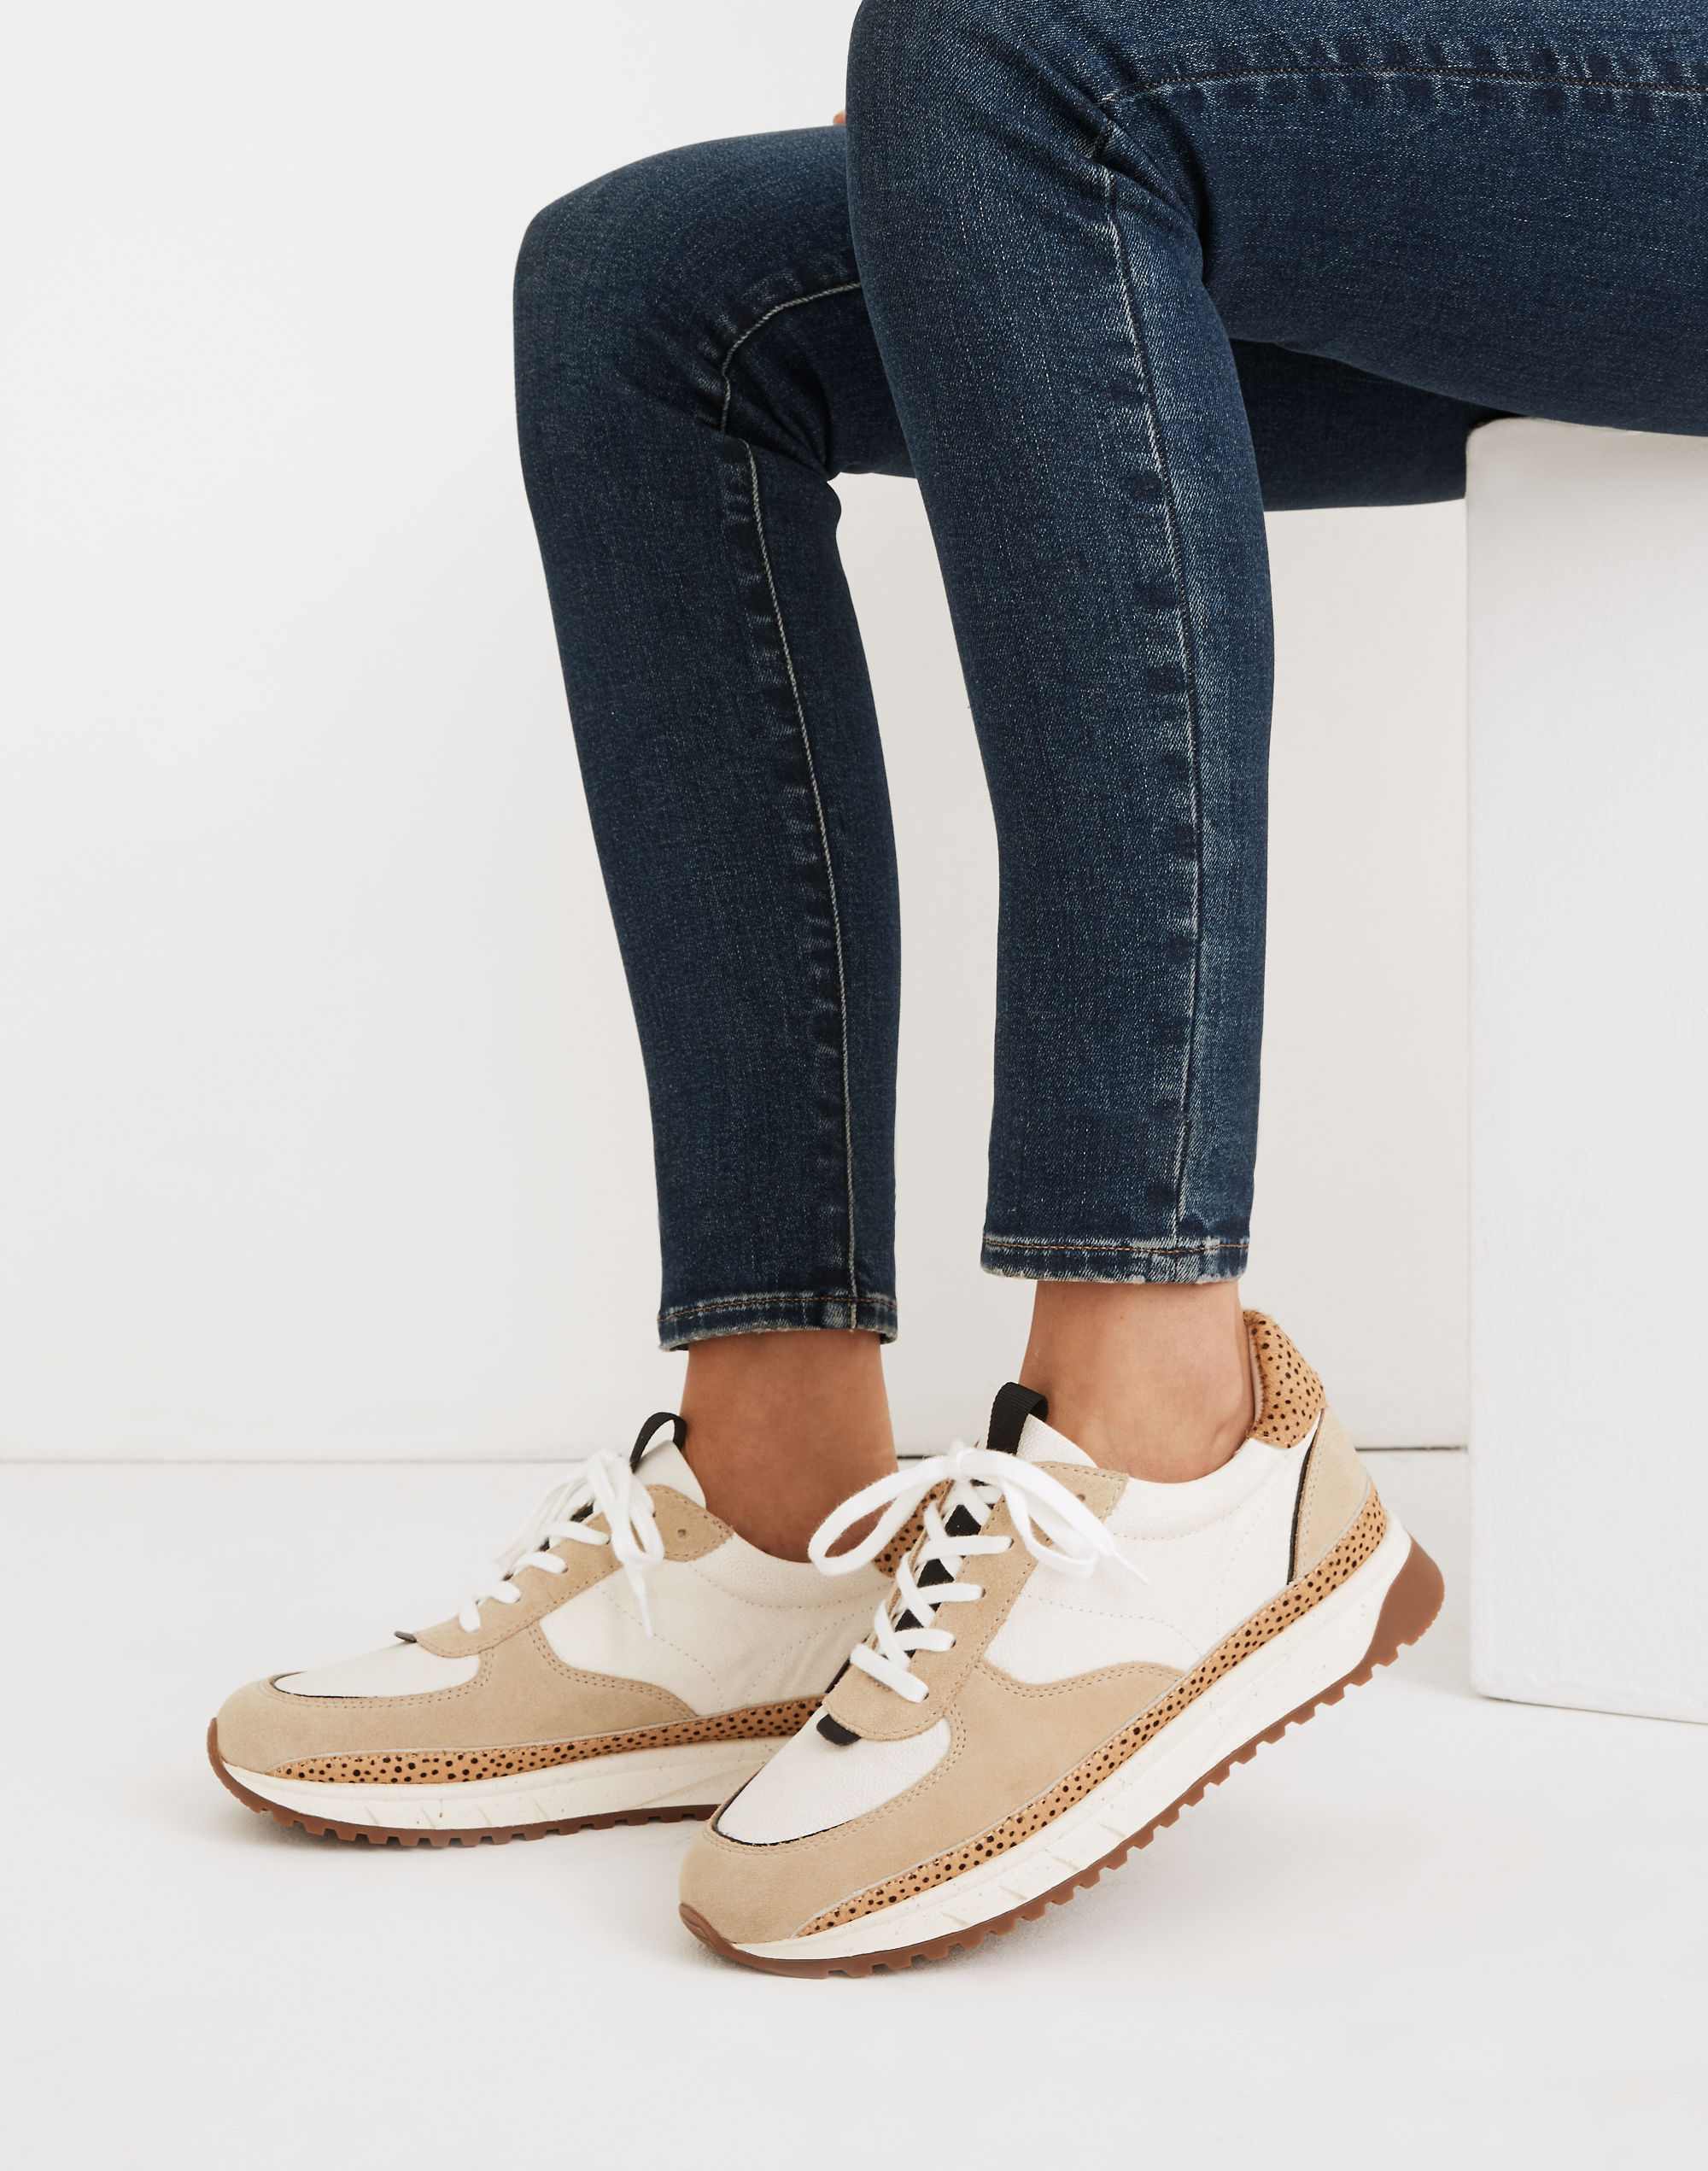 Madewell Kickoff Trainer Sneakers in Recycled Nylon and Pink Nubuck